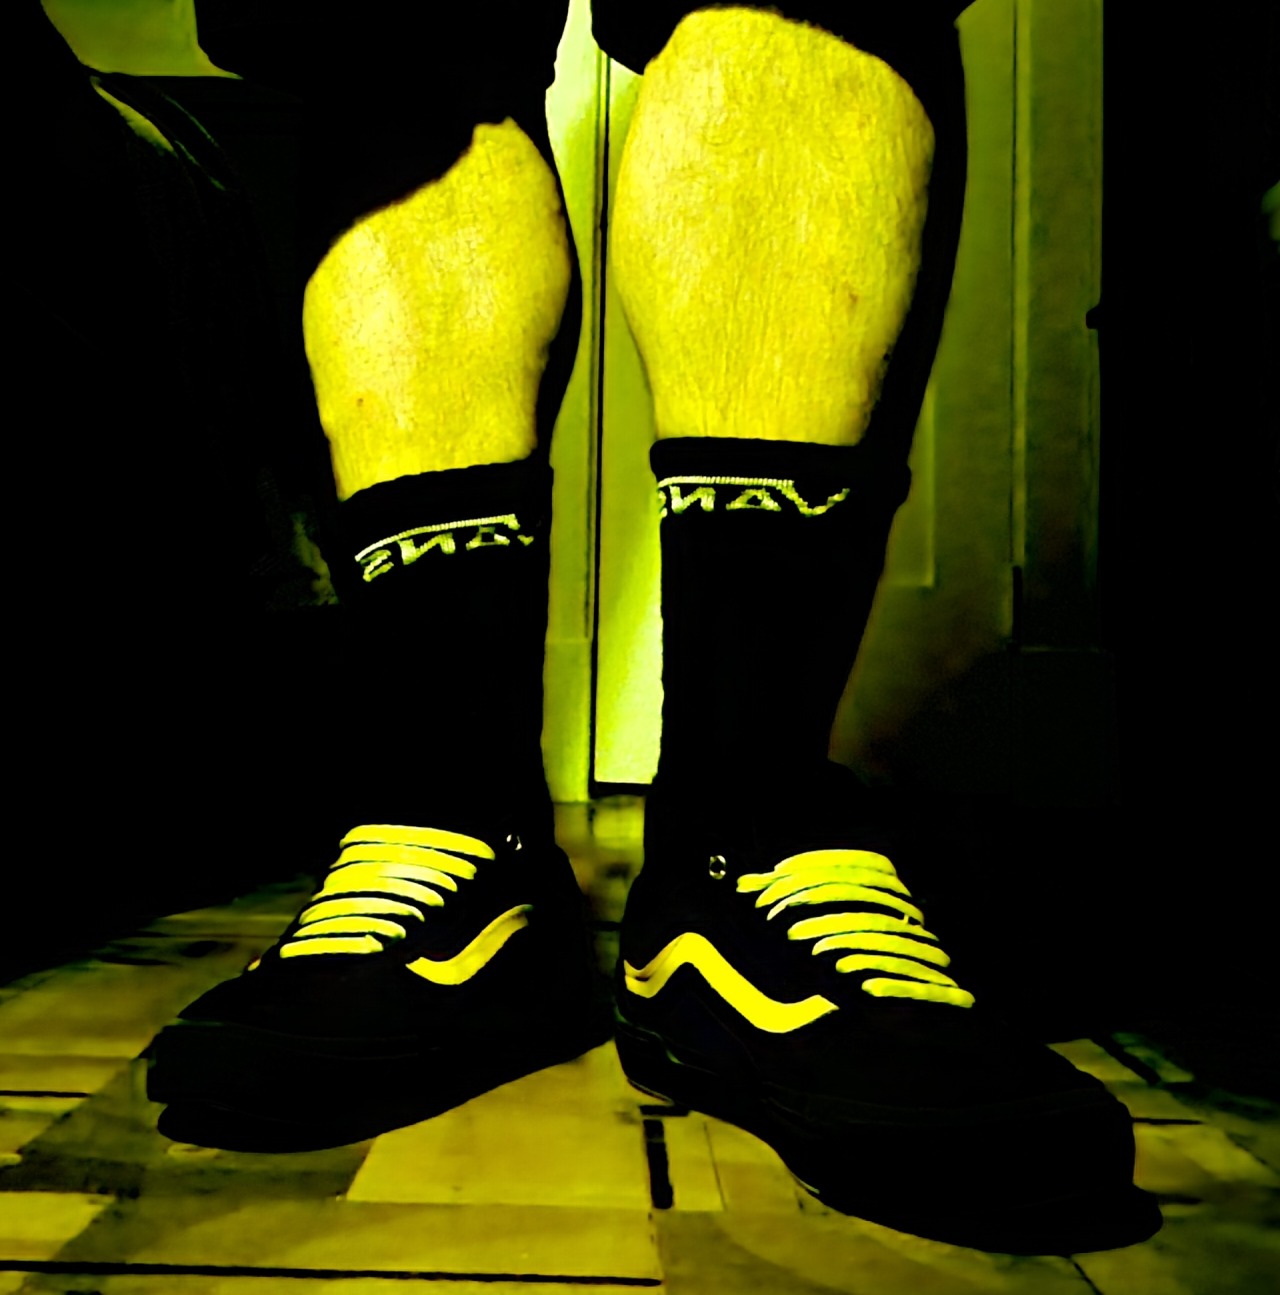 smellyfootboy:You smell that through my skate shoes? Well I’ve been running around all day and I’m pretty sure I grabbed a used pair of socks instead of my clean ones. It is so intoxicating isn’t it? Let me take em off and really let